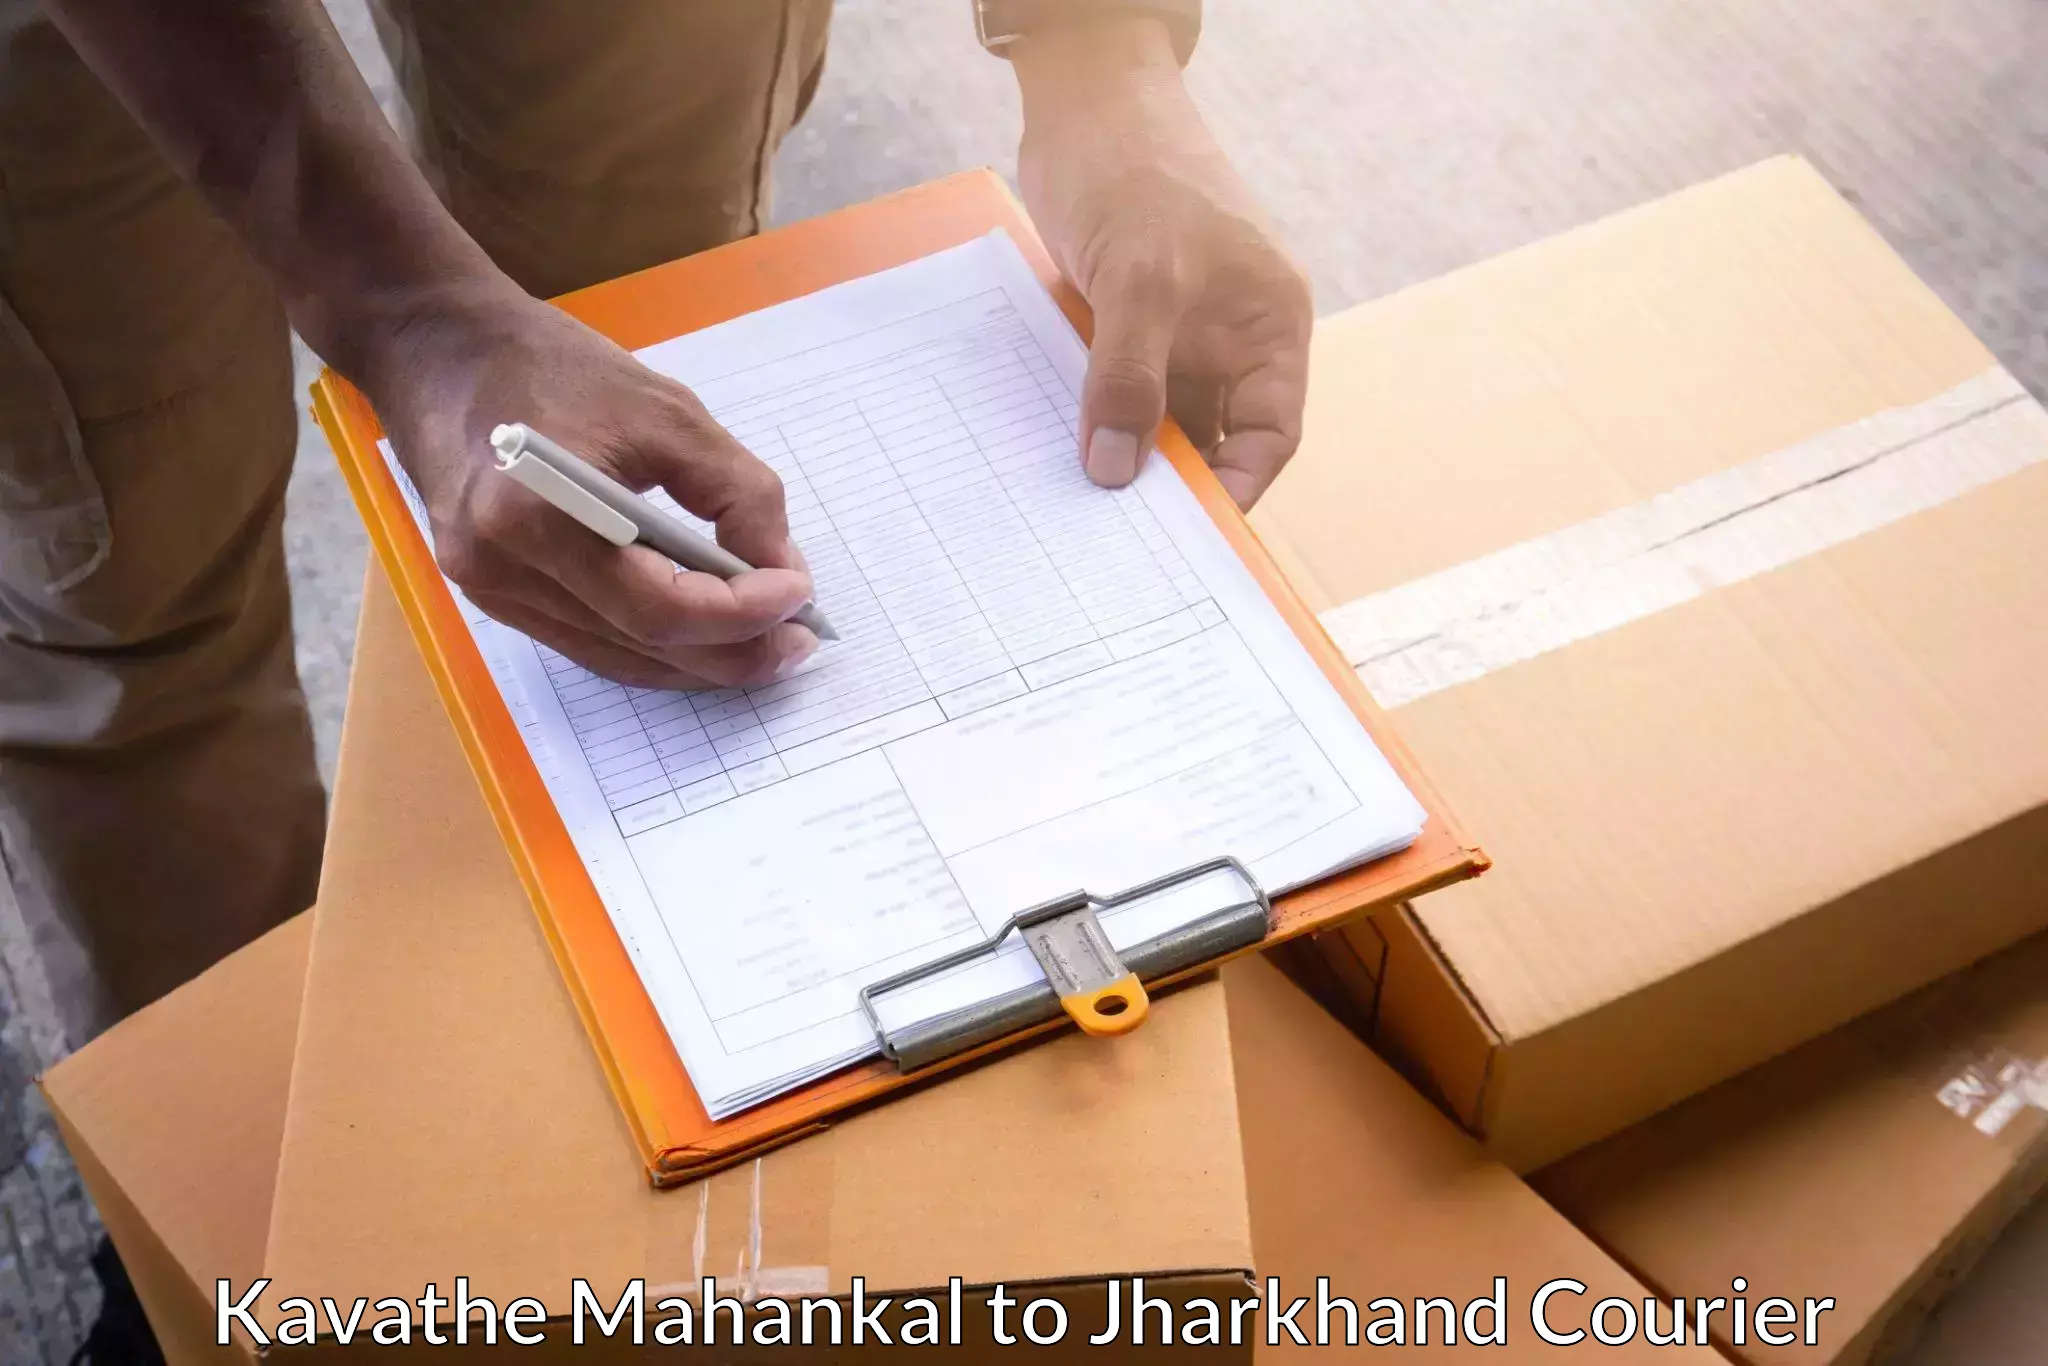 Flexible delivery schedules in Kavathe Mahankal to Bara Boarijor